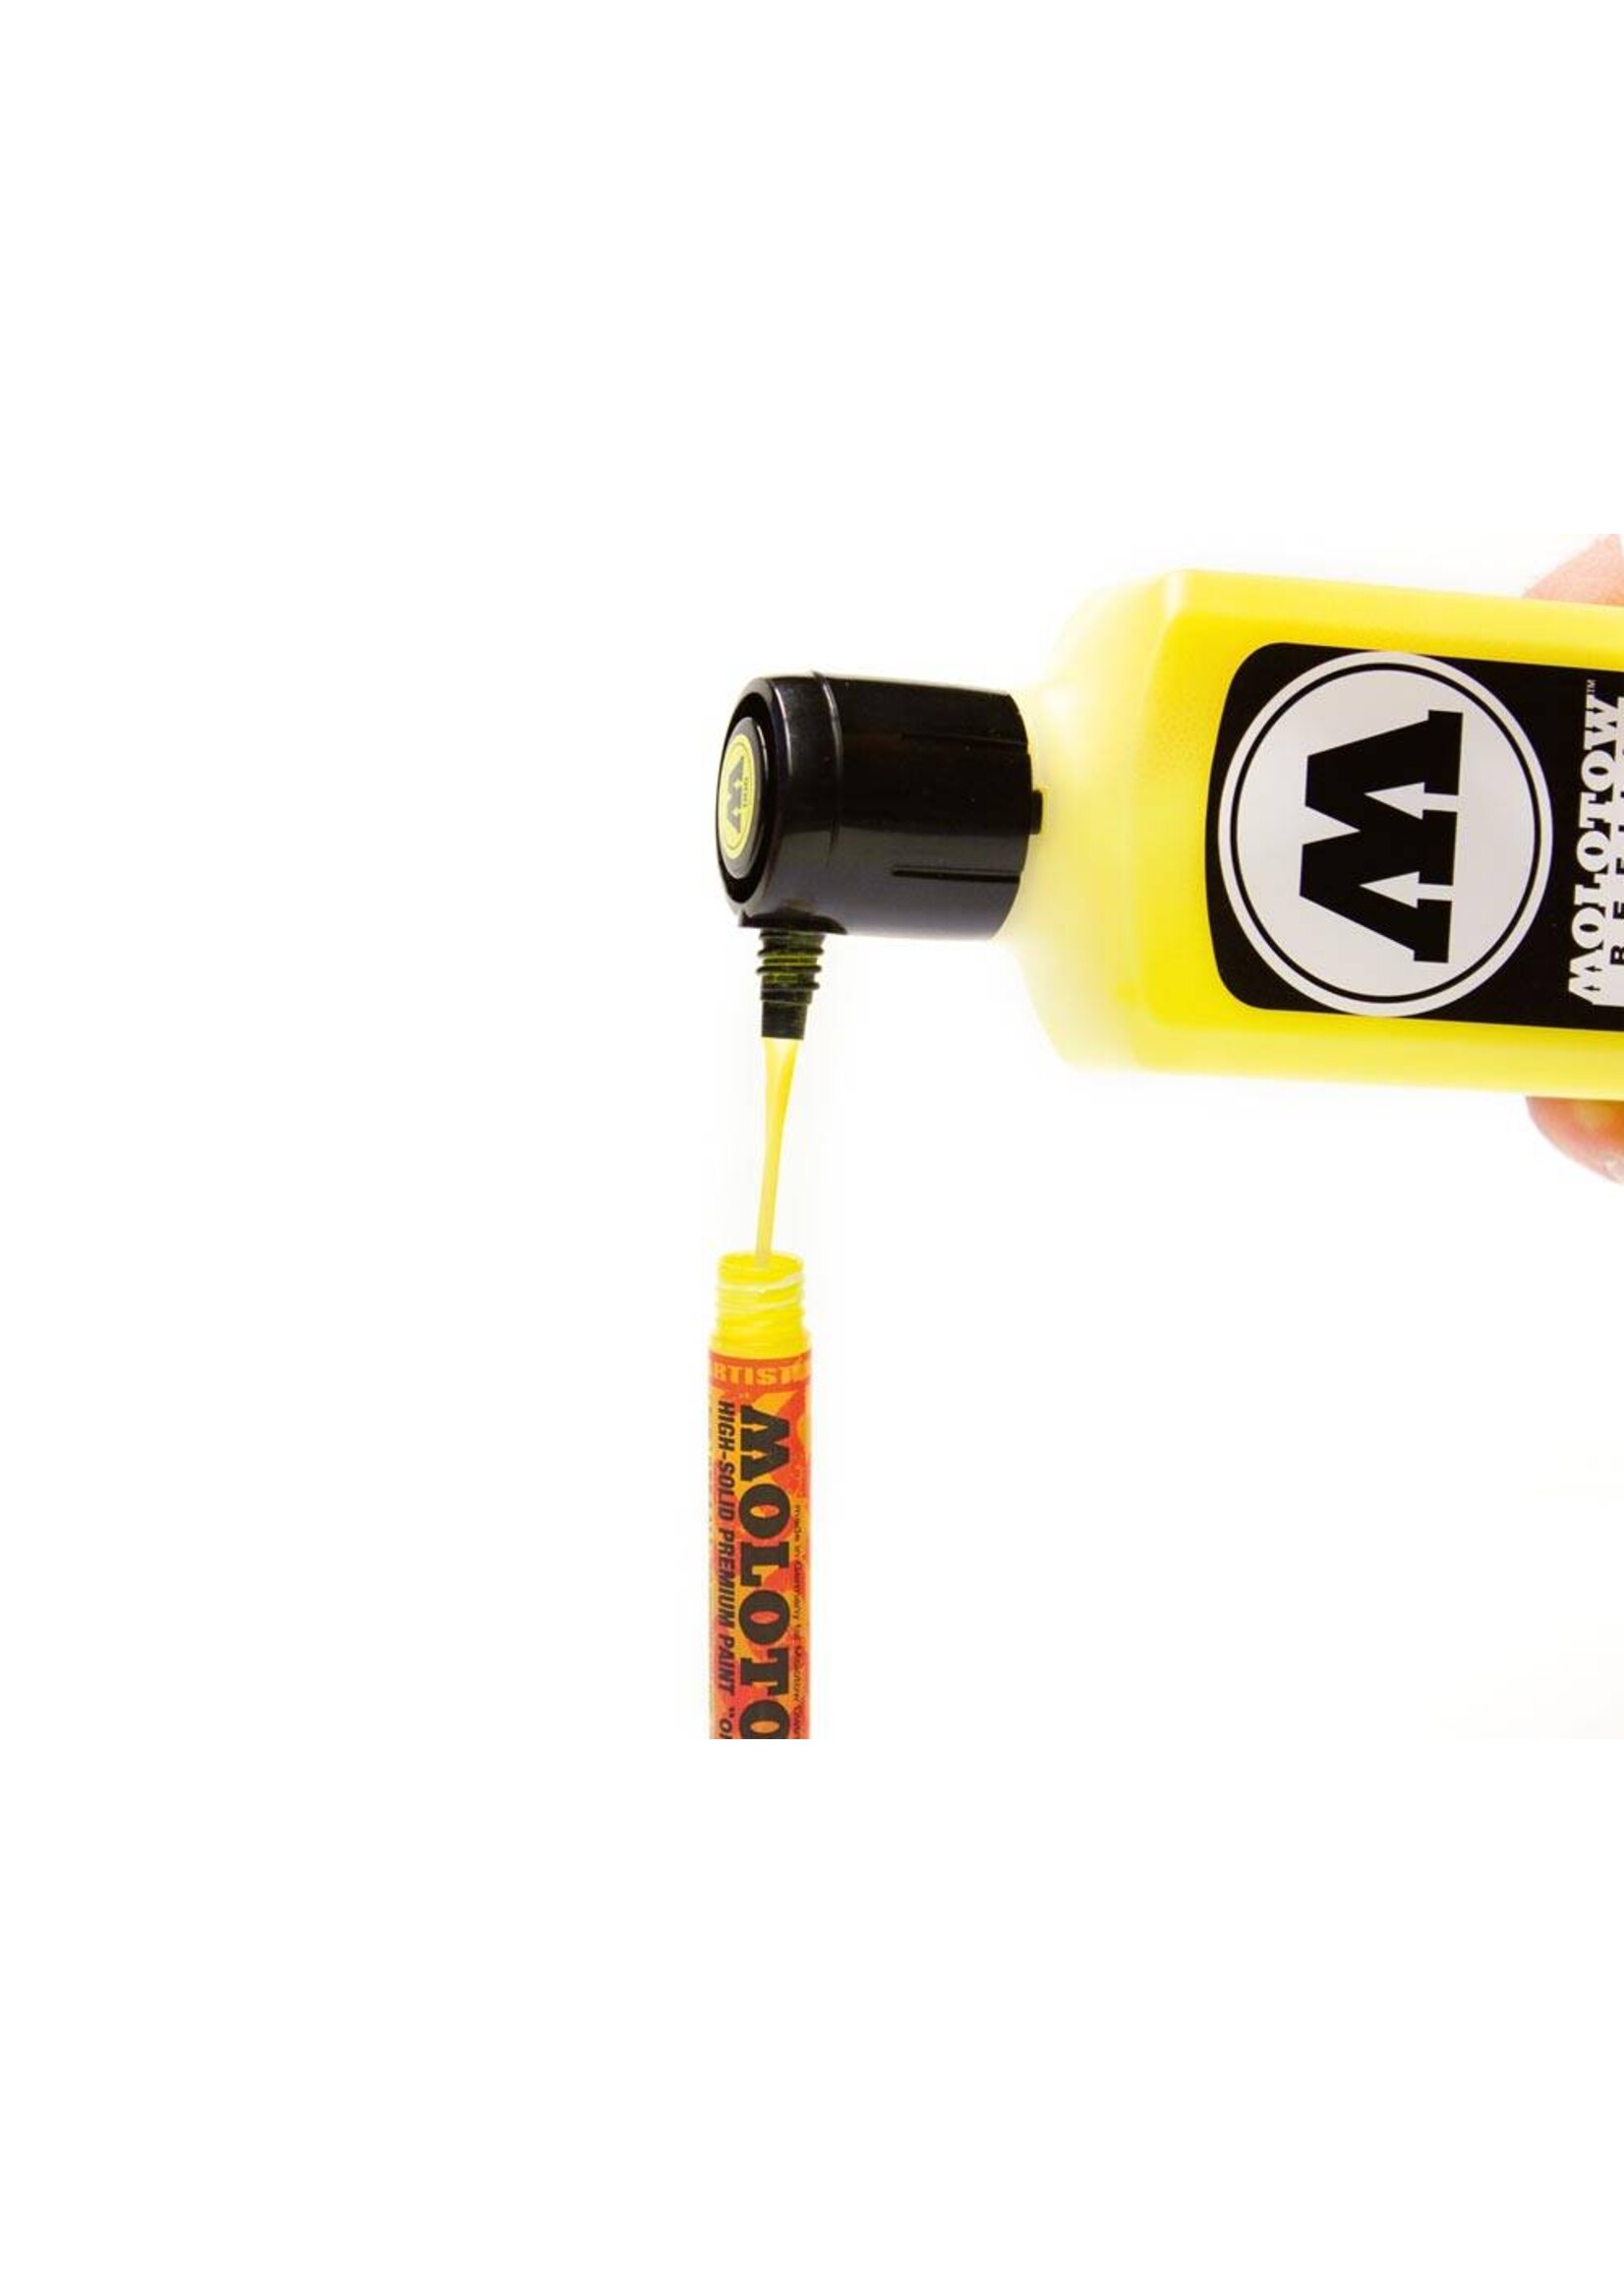 Molotow ONE4ALL 127HS BASIC SET 1 [2 mm]